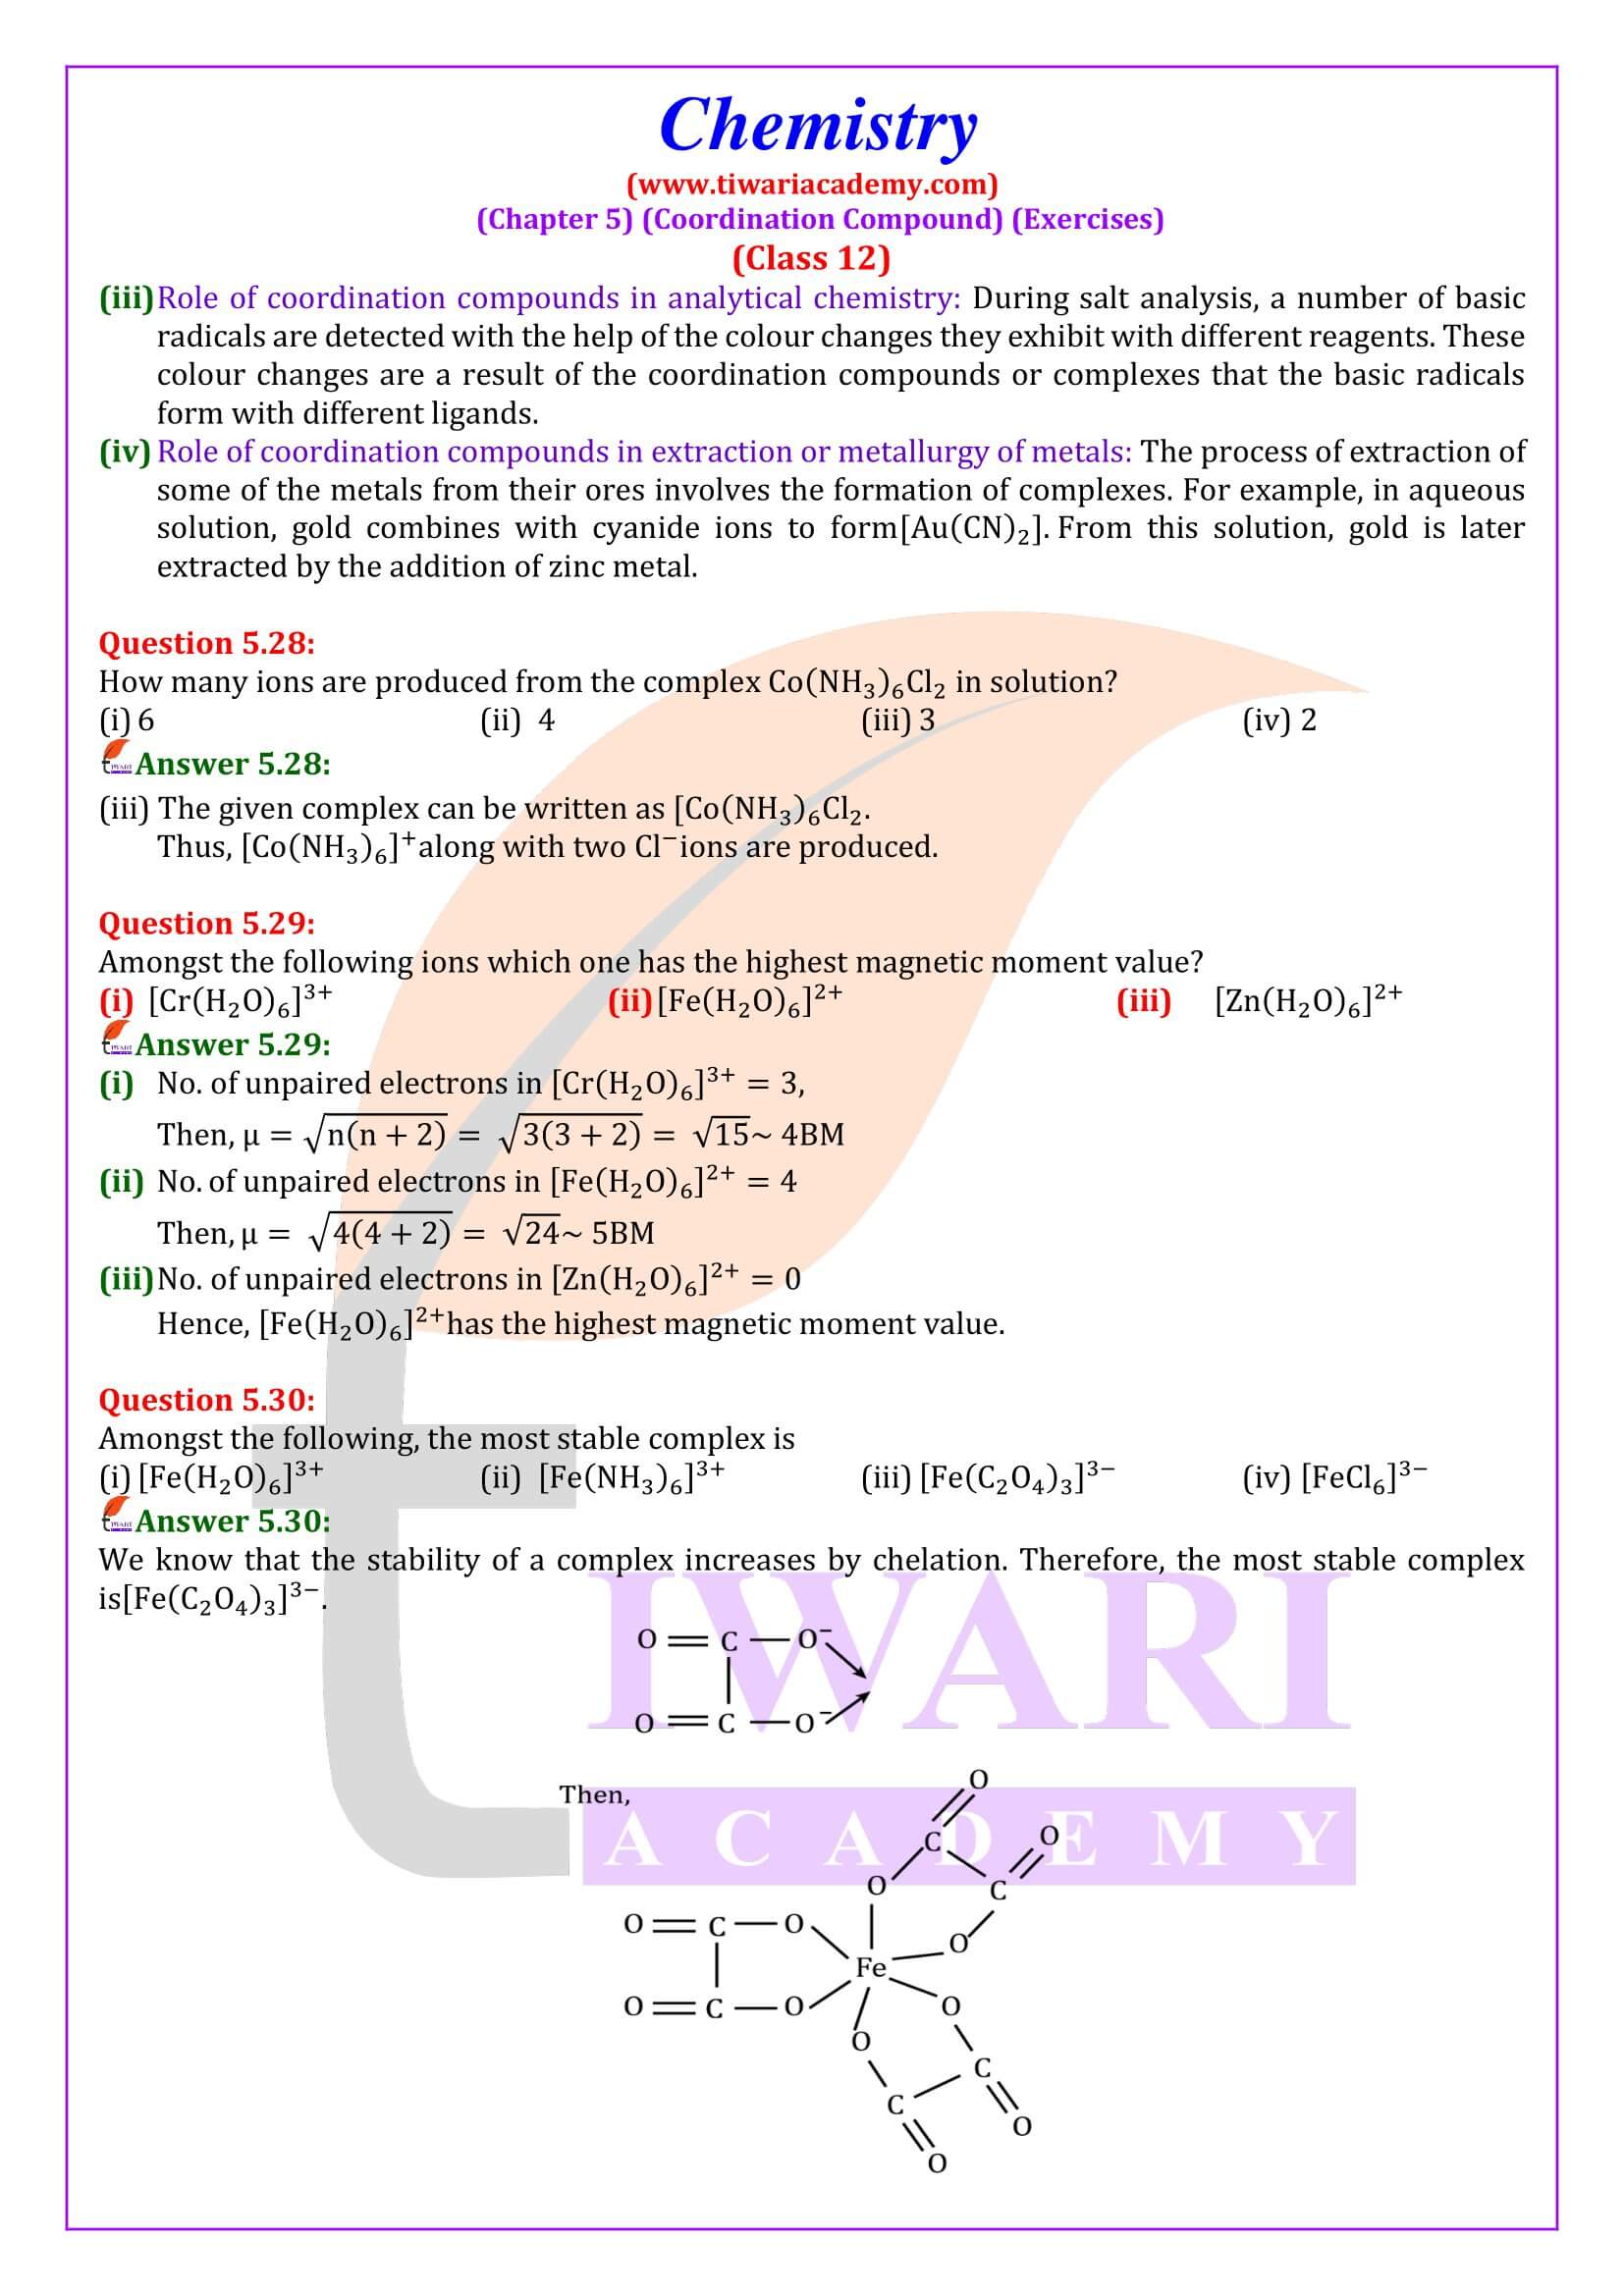 Class 12 Chemistry Chapter 5 NCERT Answers